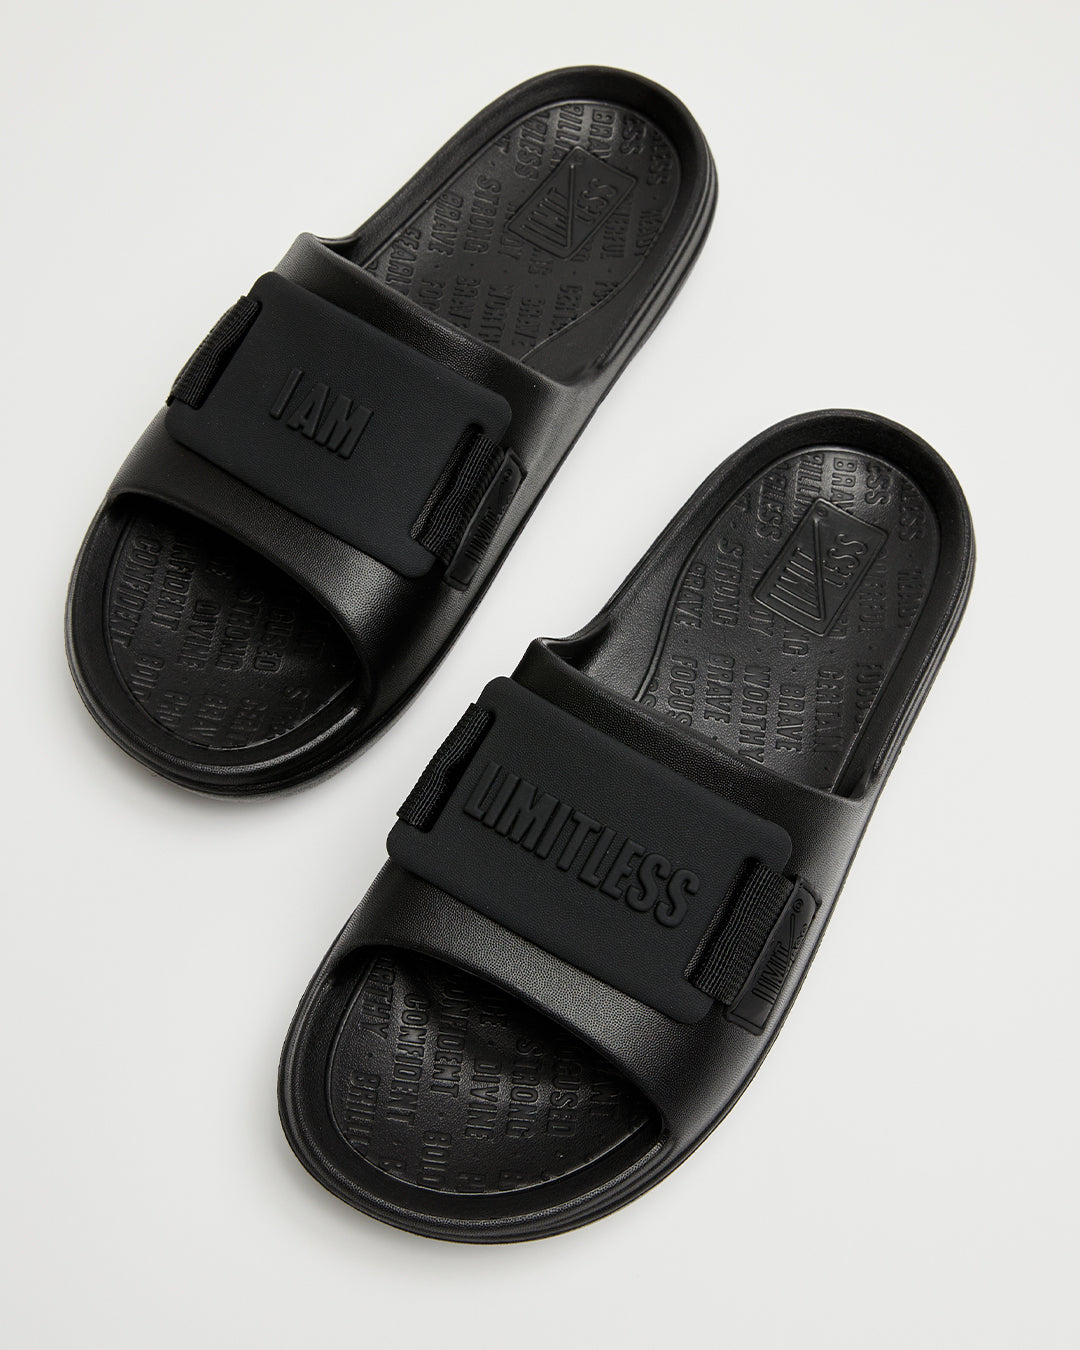 LIMITLESS SLIDES™ WITH ESSENTIAL TIBAH™ QUAD - HAHNVILLE HIGH SCHOOL EDITION